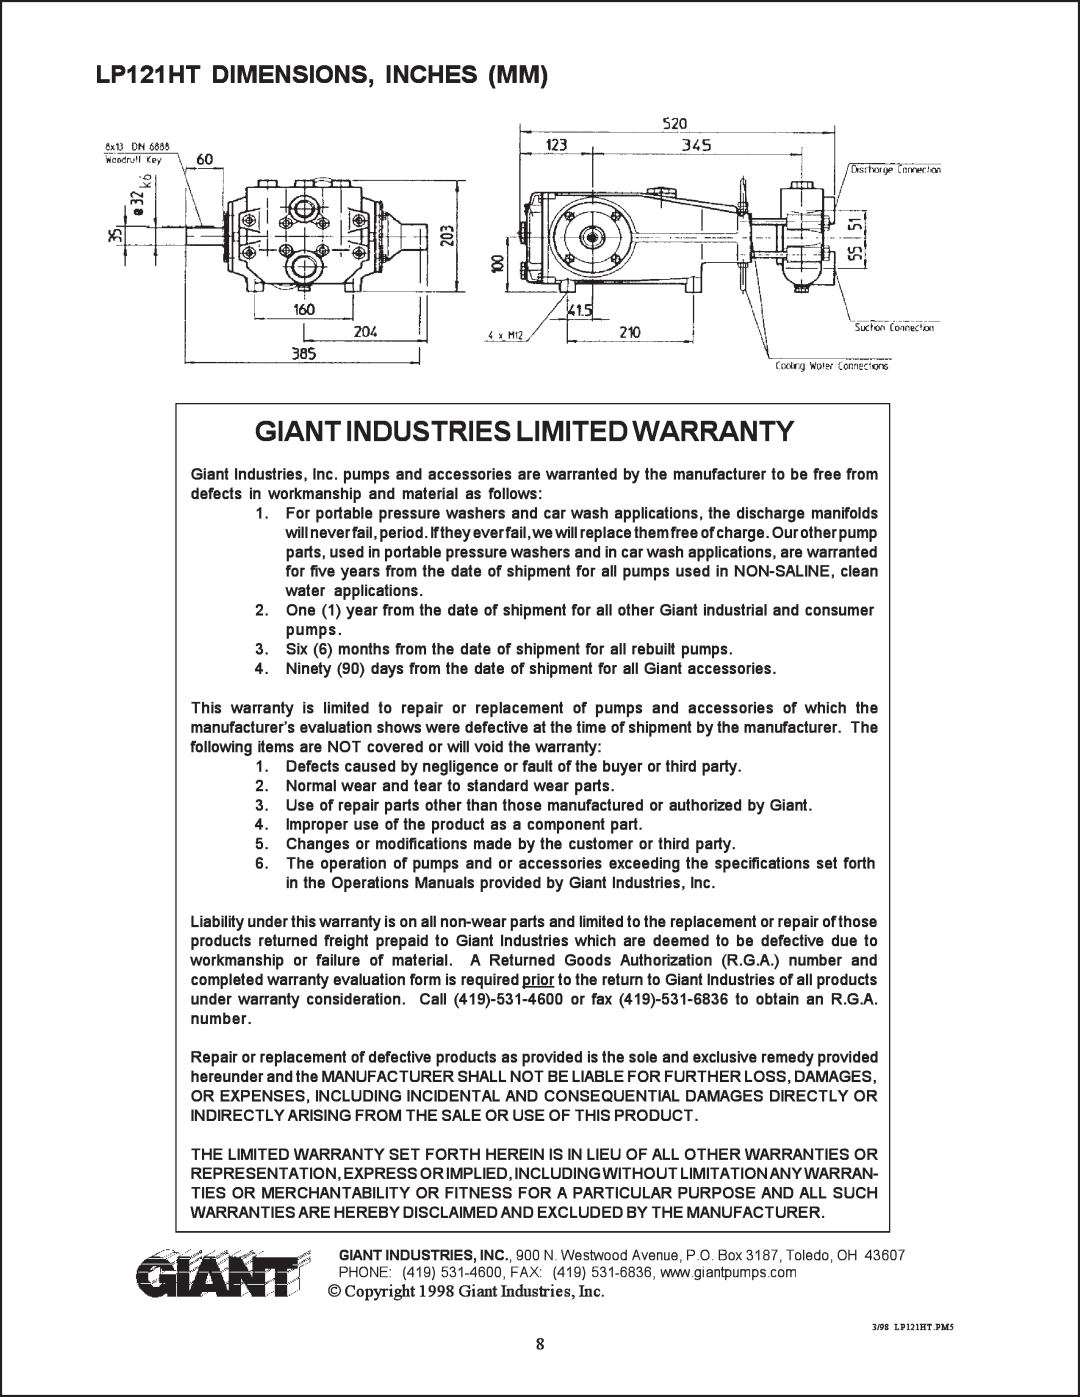 Giant installation instructions LP121HT DIMENSIONS, INCHES MM, Giant Industries Limited Warranty 